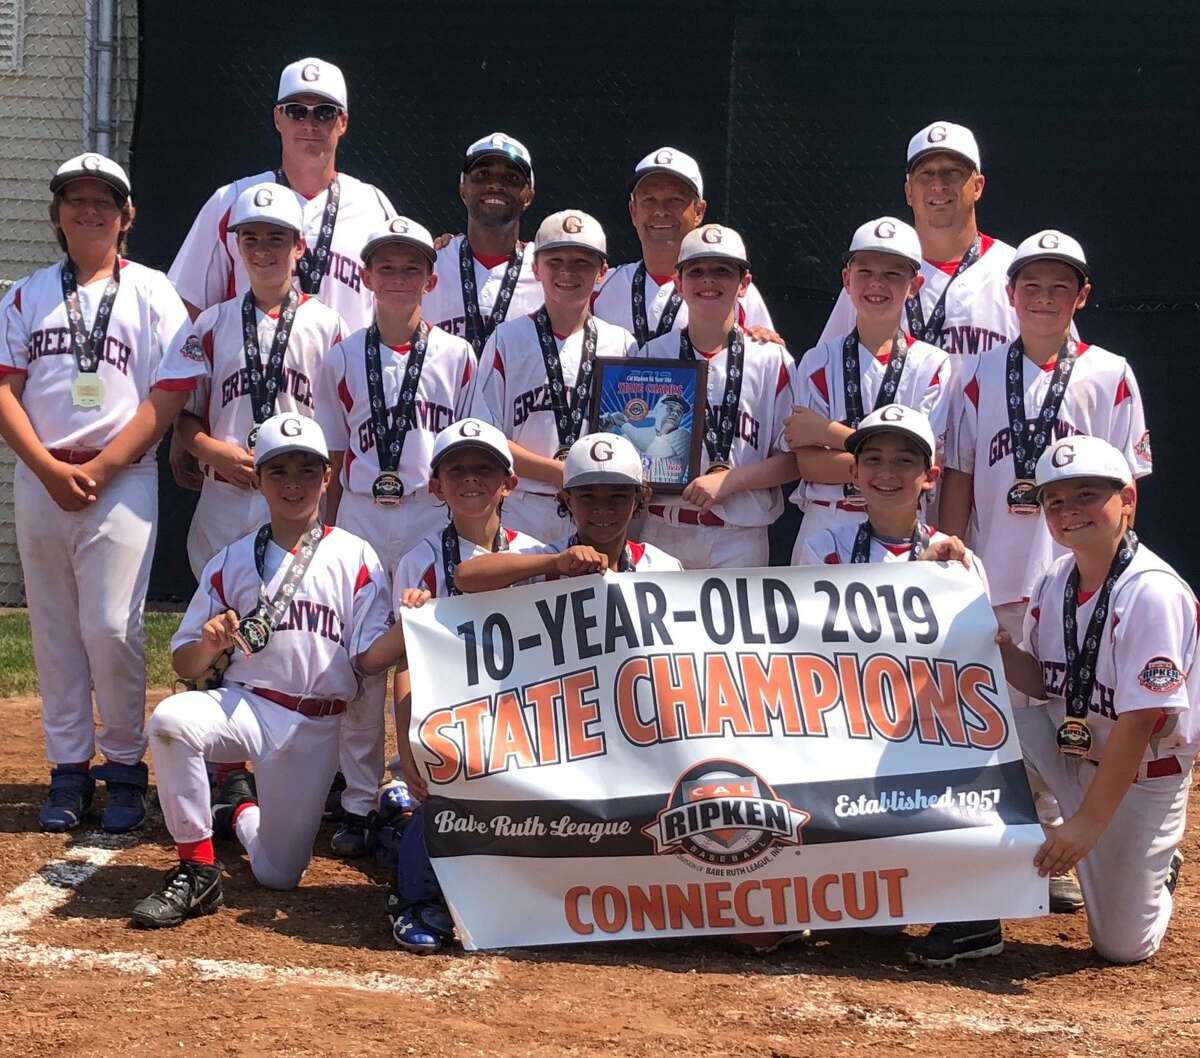 The Greenwich Cal Ripken 10-year-old All-Star team won the District I and State tournament championships recently.